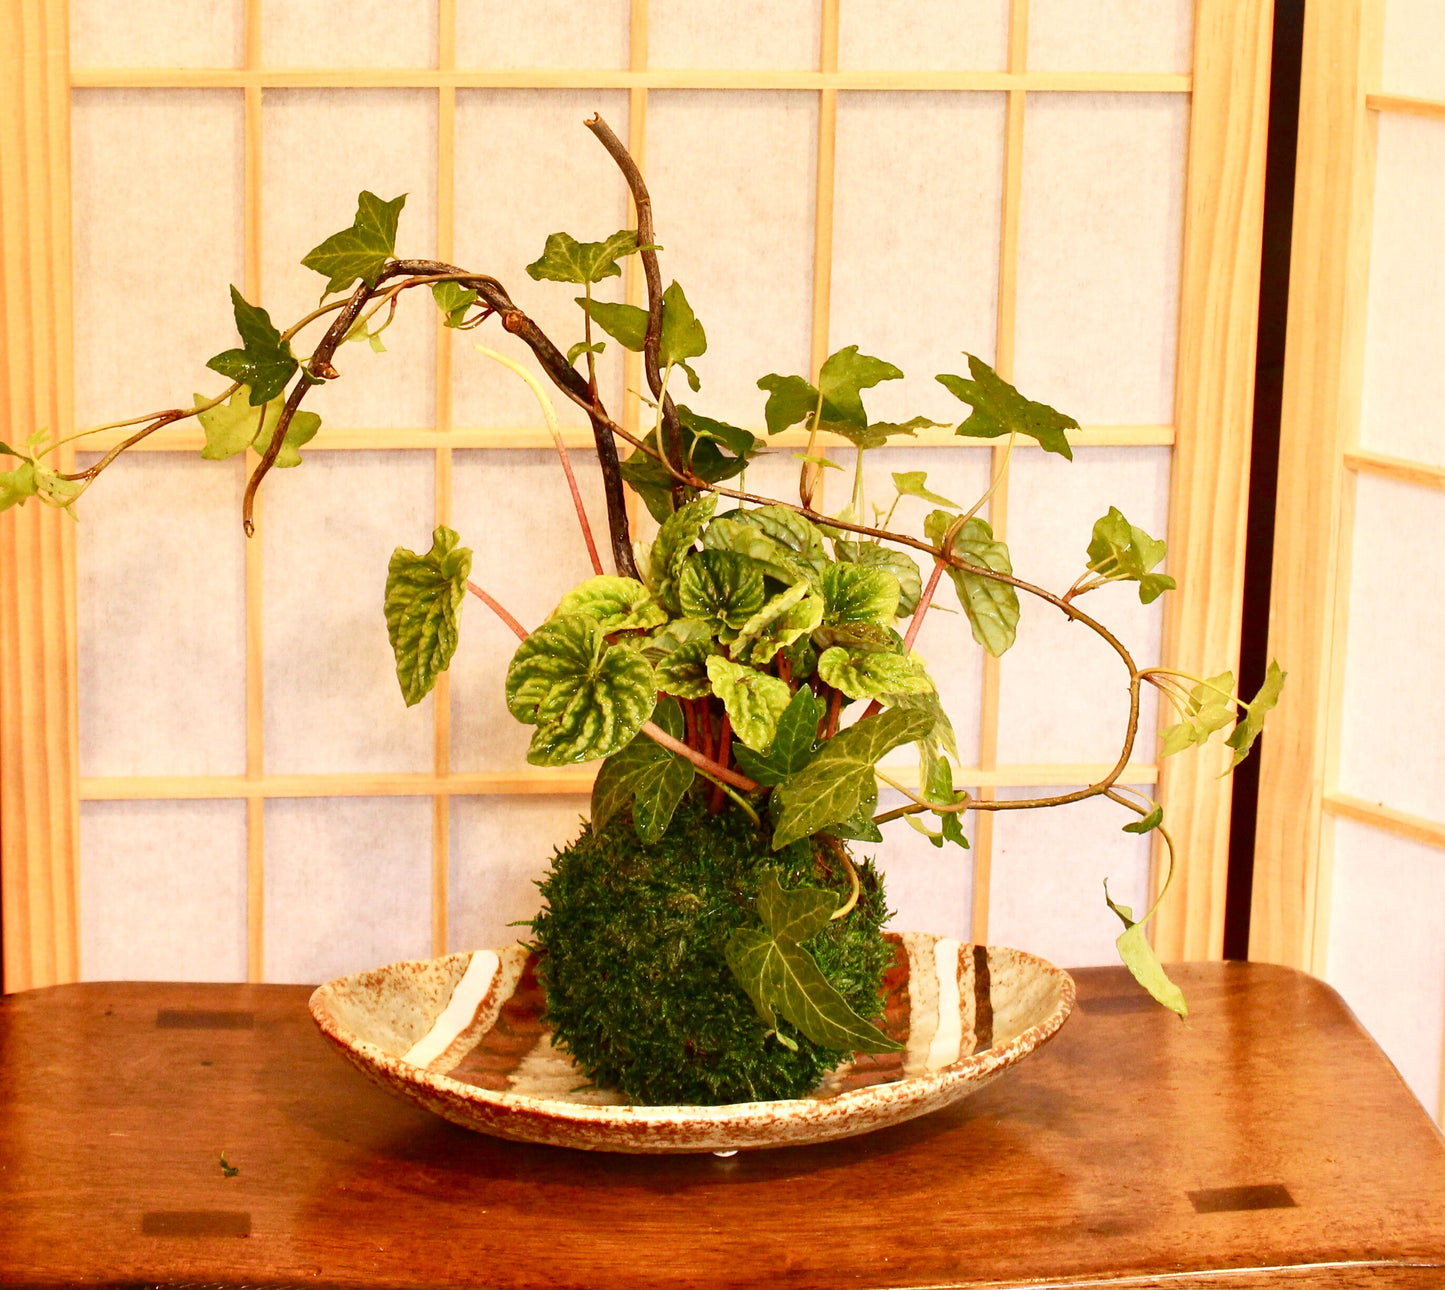 Arranged Kokedama with ripple peperomia and ivy, Japanese traditional indoor moss ball garden